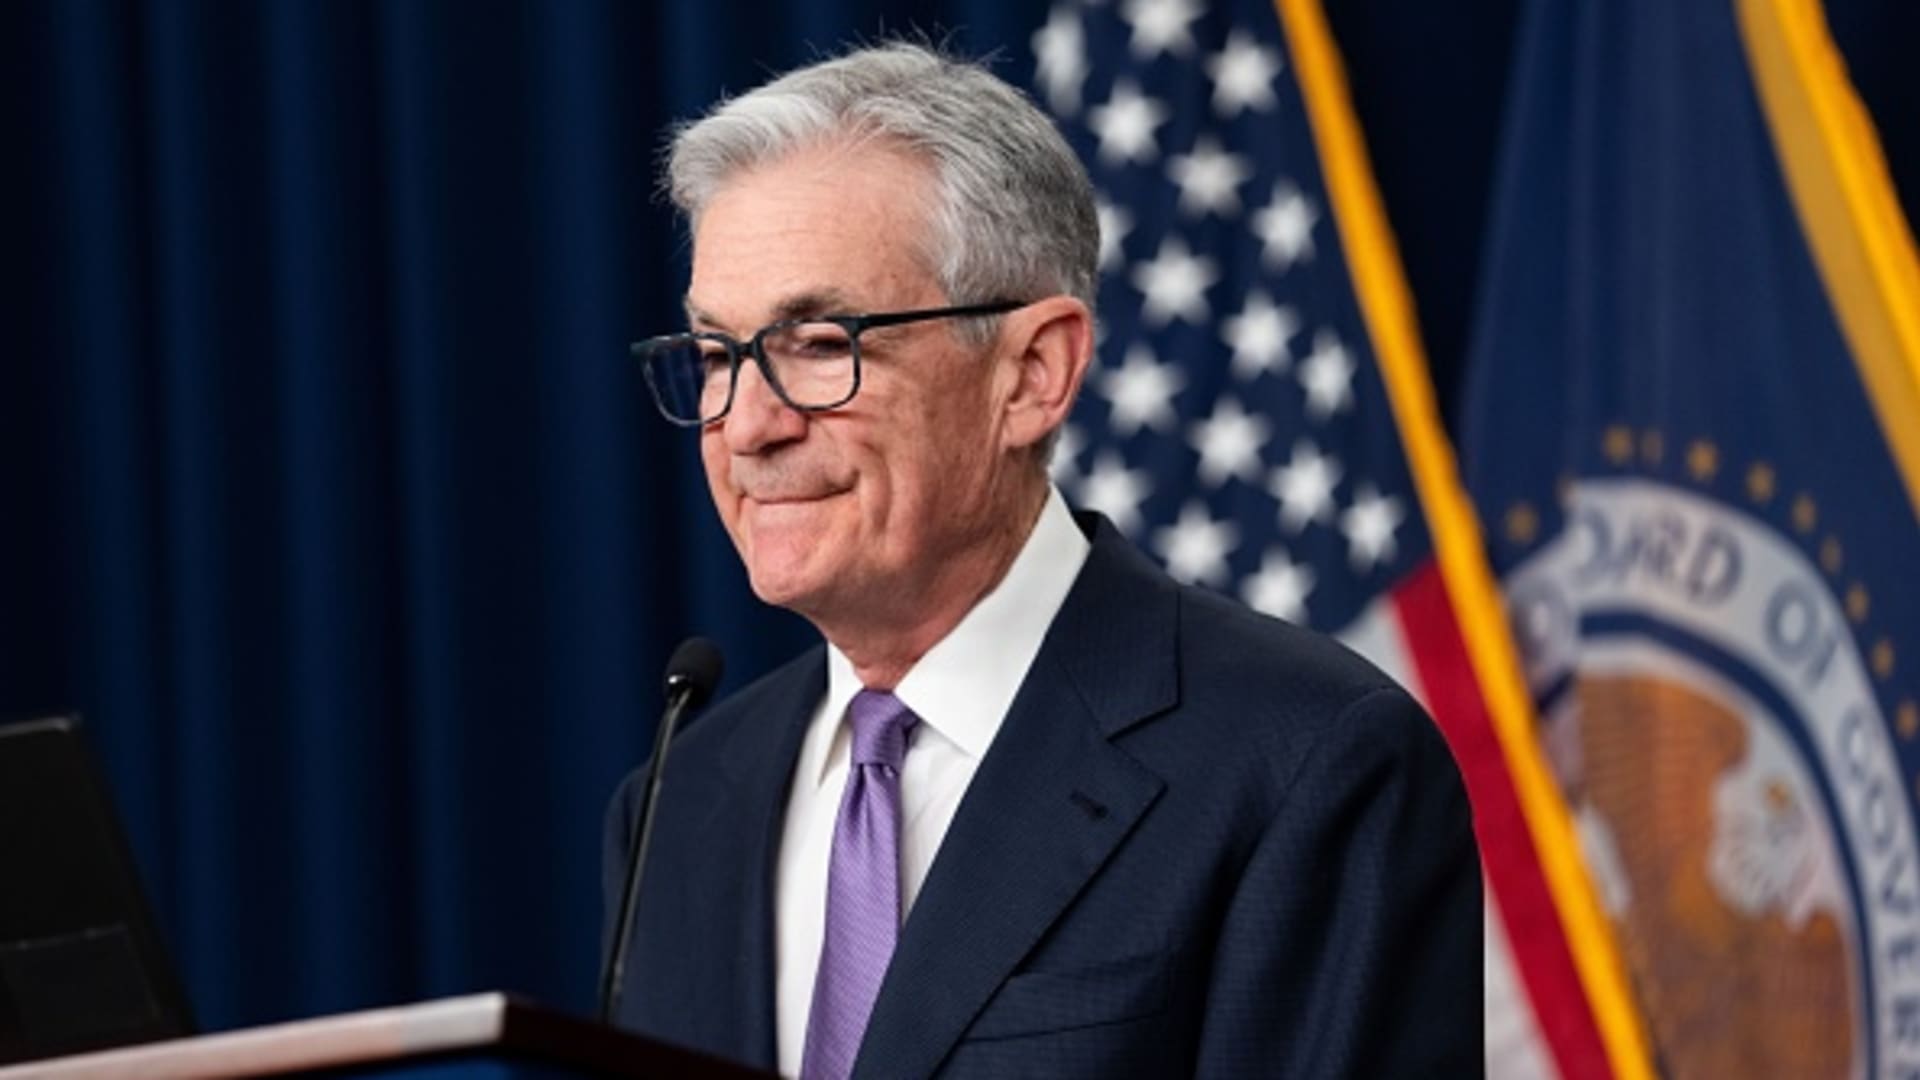 Fed Officials Encourage Patience in Rate Adjustments, Meeting Records Indicate